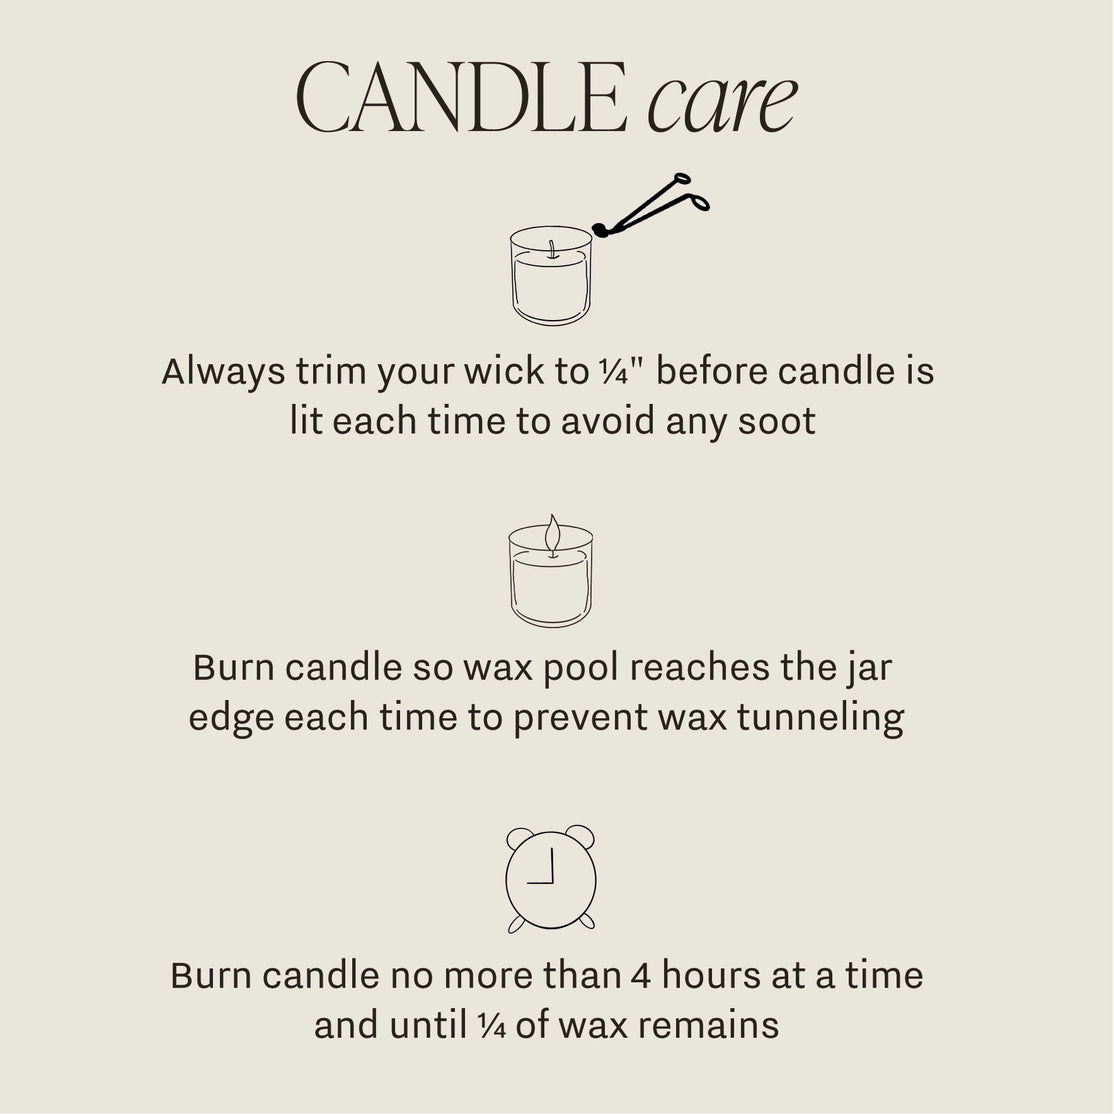 You Got This Soy Candle